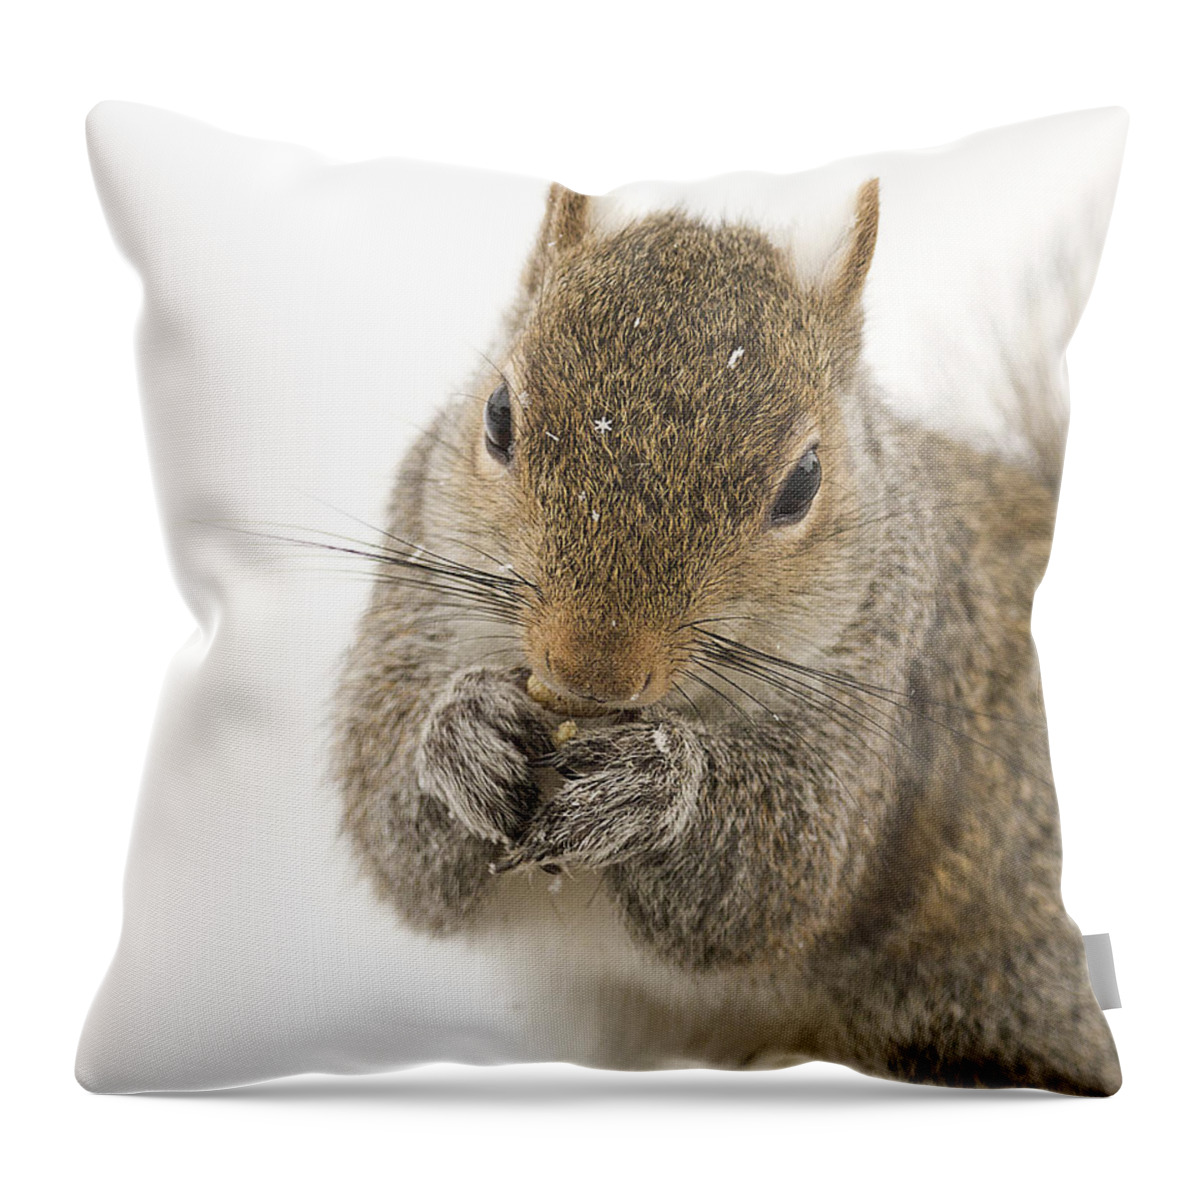 Squirrel Throw Pillow featuring the photograph Squirrel Portrait by Marty Maynard